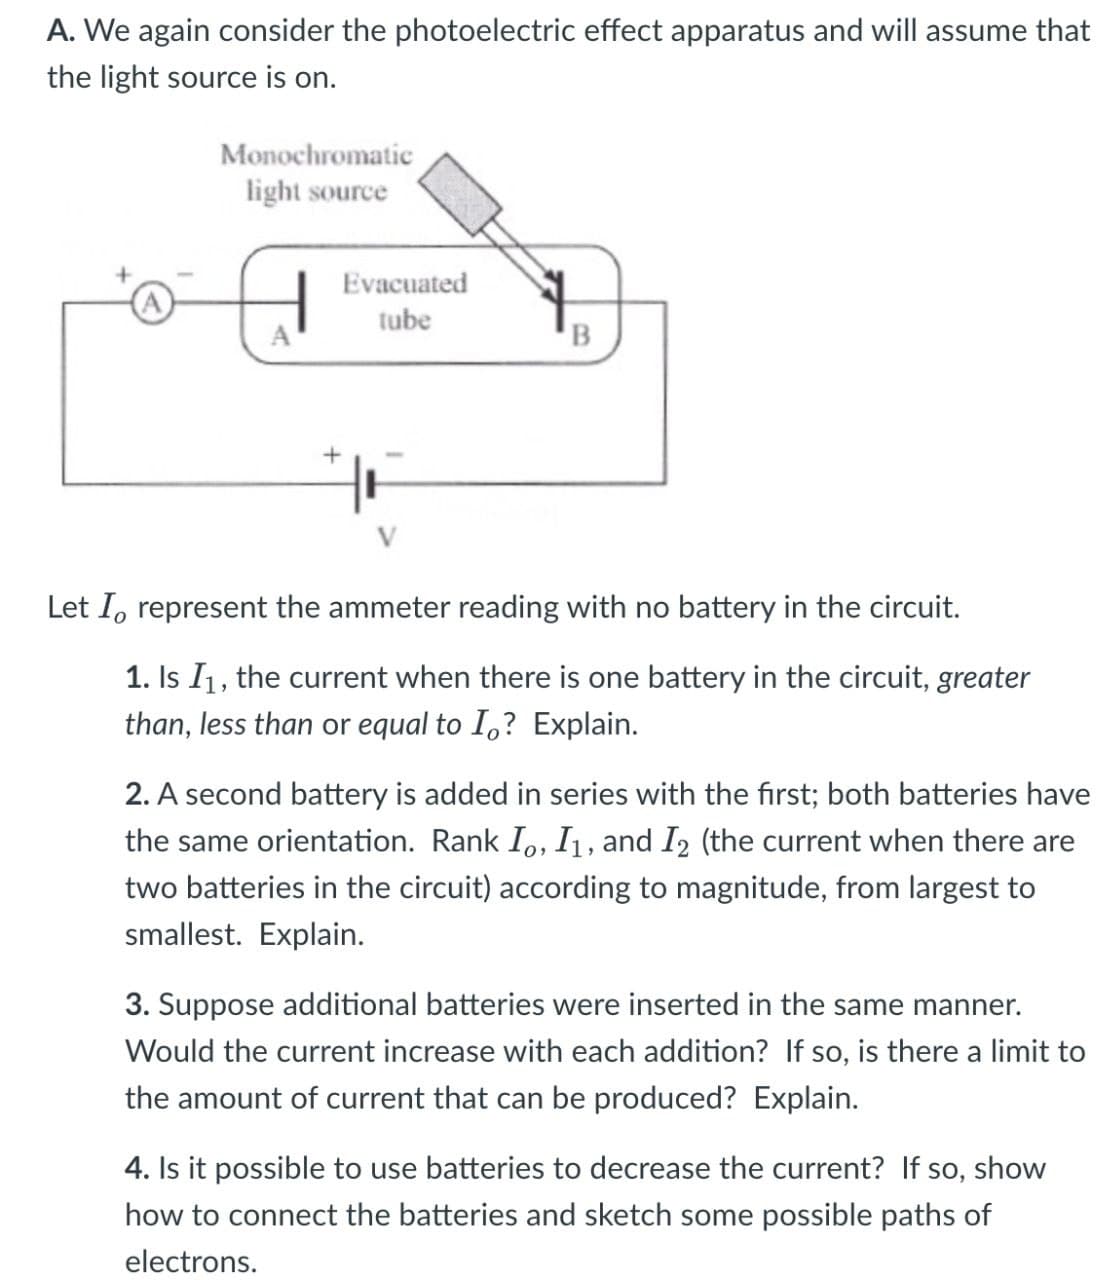 A. We again consider the photoelectric effect apparatus and will assume that
the light source is on.
Monochromatic
light source
H
Evacuated
tube
B
+
Let I, represent the ammeter reading with no battery in the circuit.
1. Is I1, the current when there is one battery in the circuit, greater
than, less than or equal to I? Explain.
2. A second battery is added in series with the first; both batteries have
the same orientation. Rank I。, I₁, and 12 (the current when there are
two batteries in the circuit) according to magnitude, from largest to
smallest. Explain.
3. Suppose additional batteries were inserted in the same manner.
Would the current increase with each addition? If so, is there a limit to
the amount of current that can be produced? Explain.
4. Is it possible to use batteries to decrease the current? If so, show
how to connect the batteries and sketch some possible paths of
electrons.